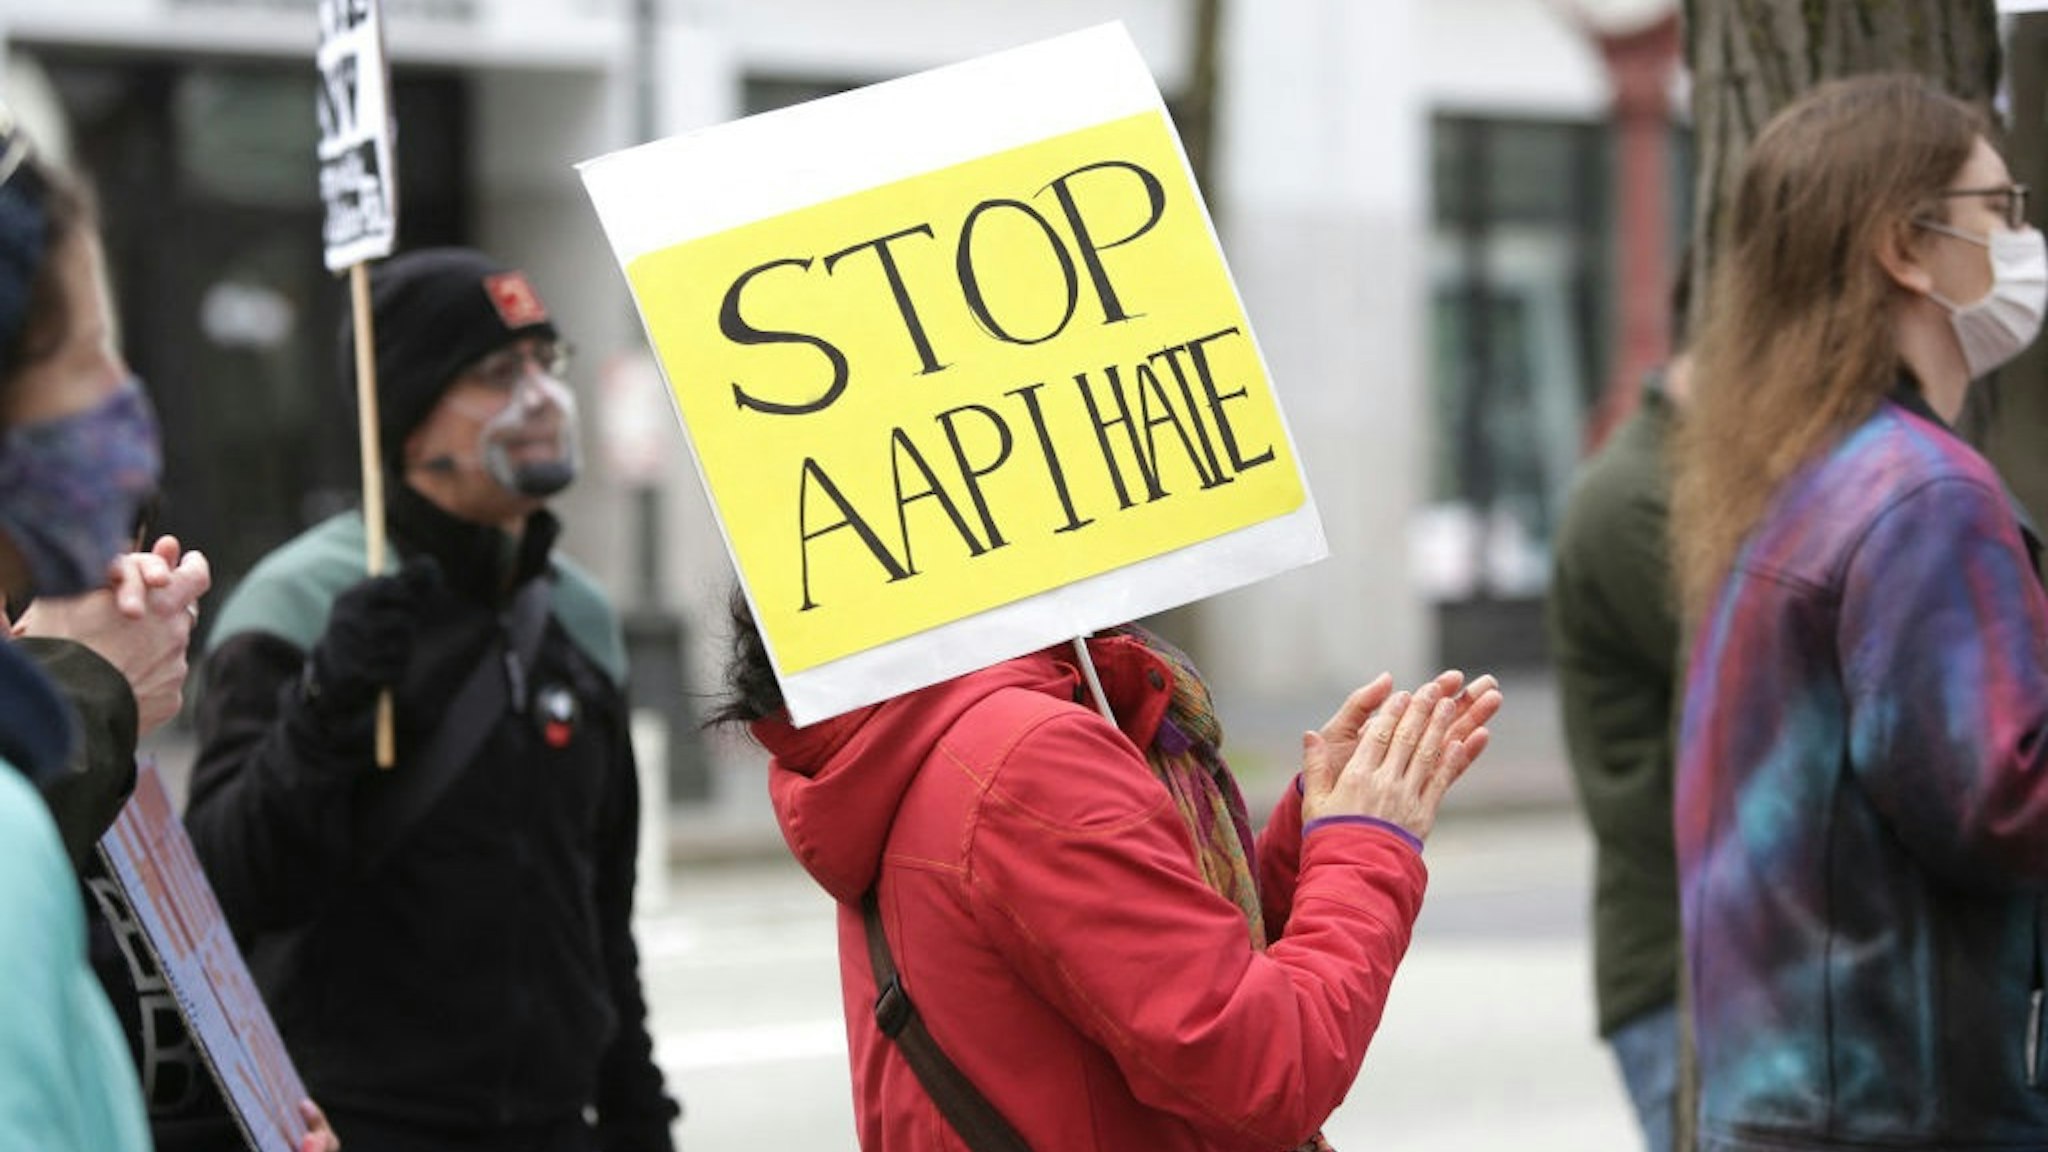 A demonstrator holds a sign calling for a stop to hate against Asian Americans and Pacific Islanders (AAPI) during a national day of action against anti-Asian violence in Seattle, Washington on March 27, 2021.